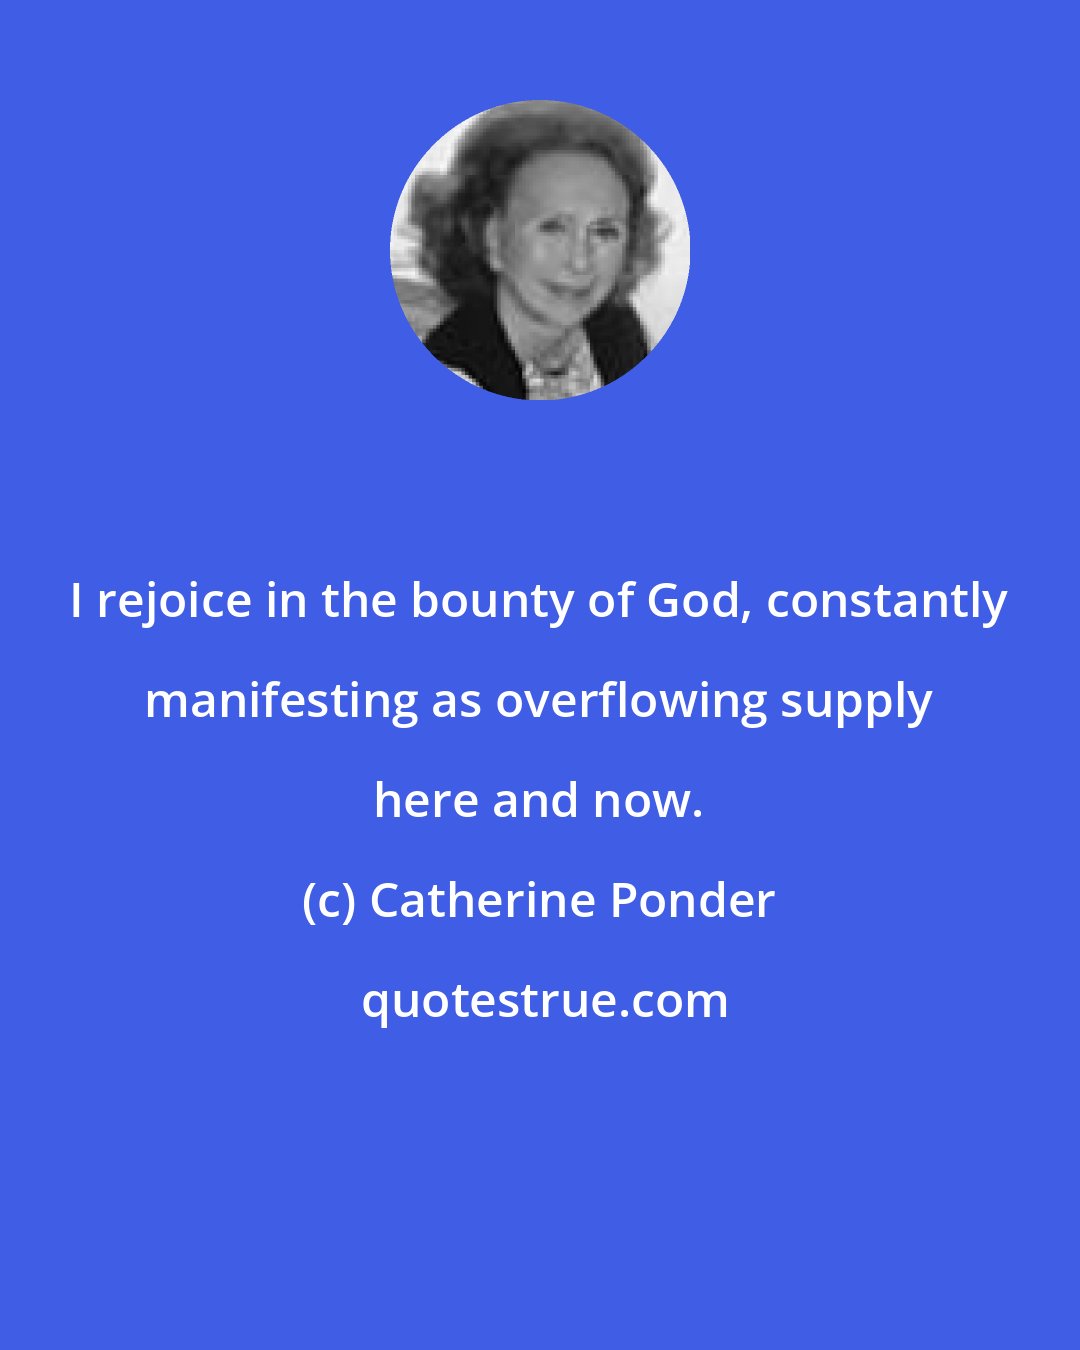 Catherine Ponder: I rejoice in the bounty of God, constantly manifesting as overflowing supply here and now.